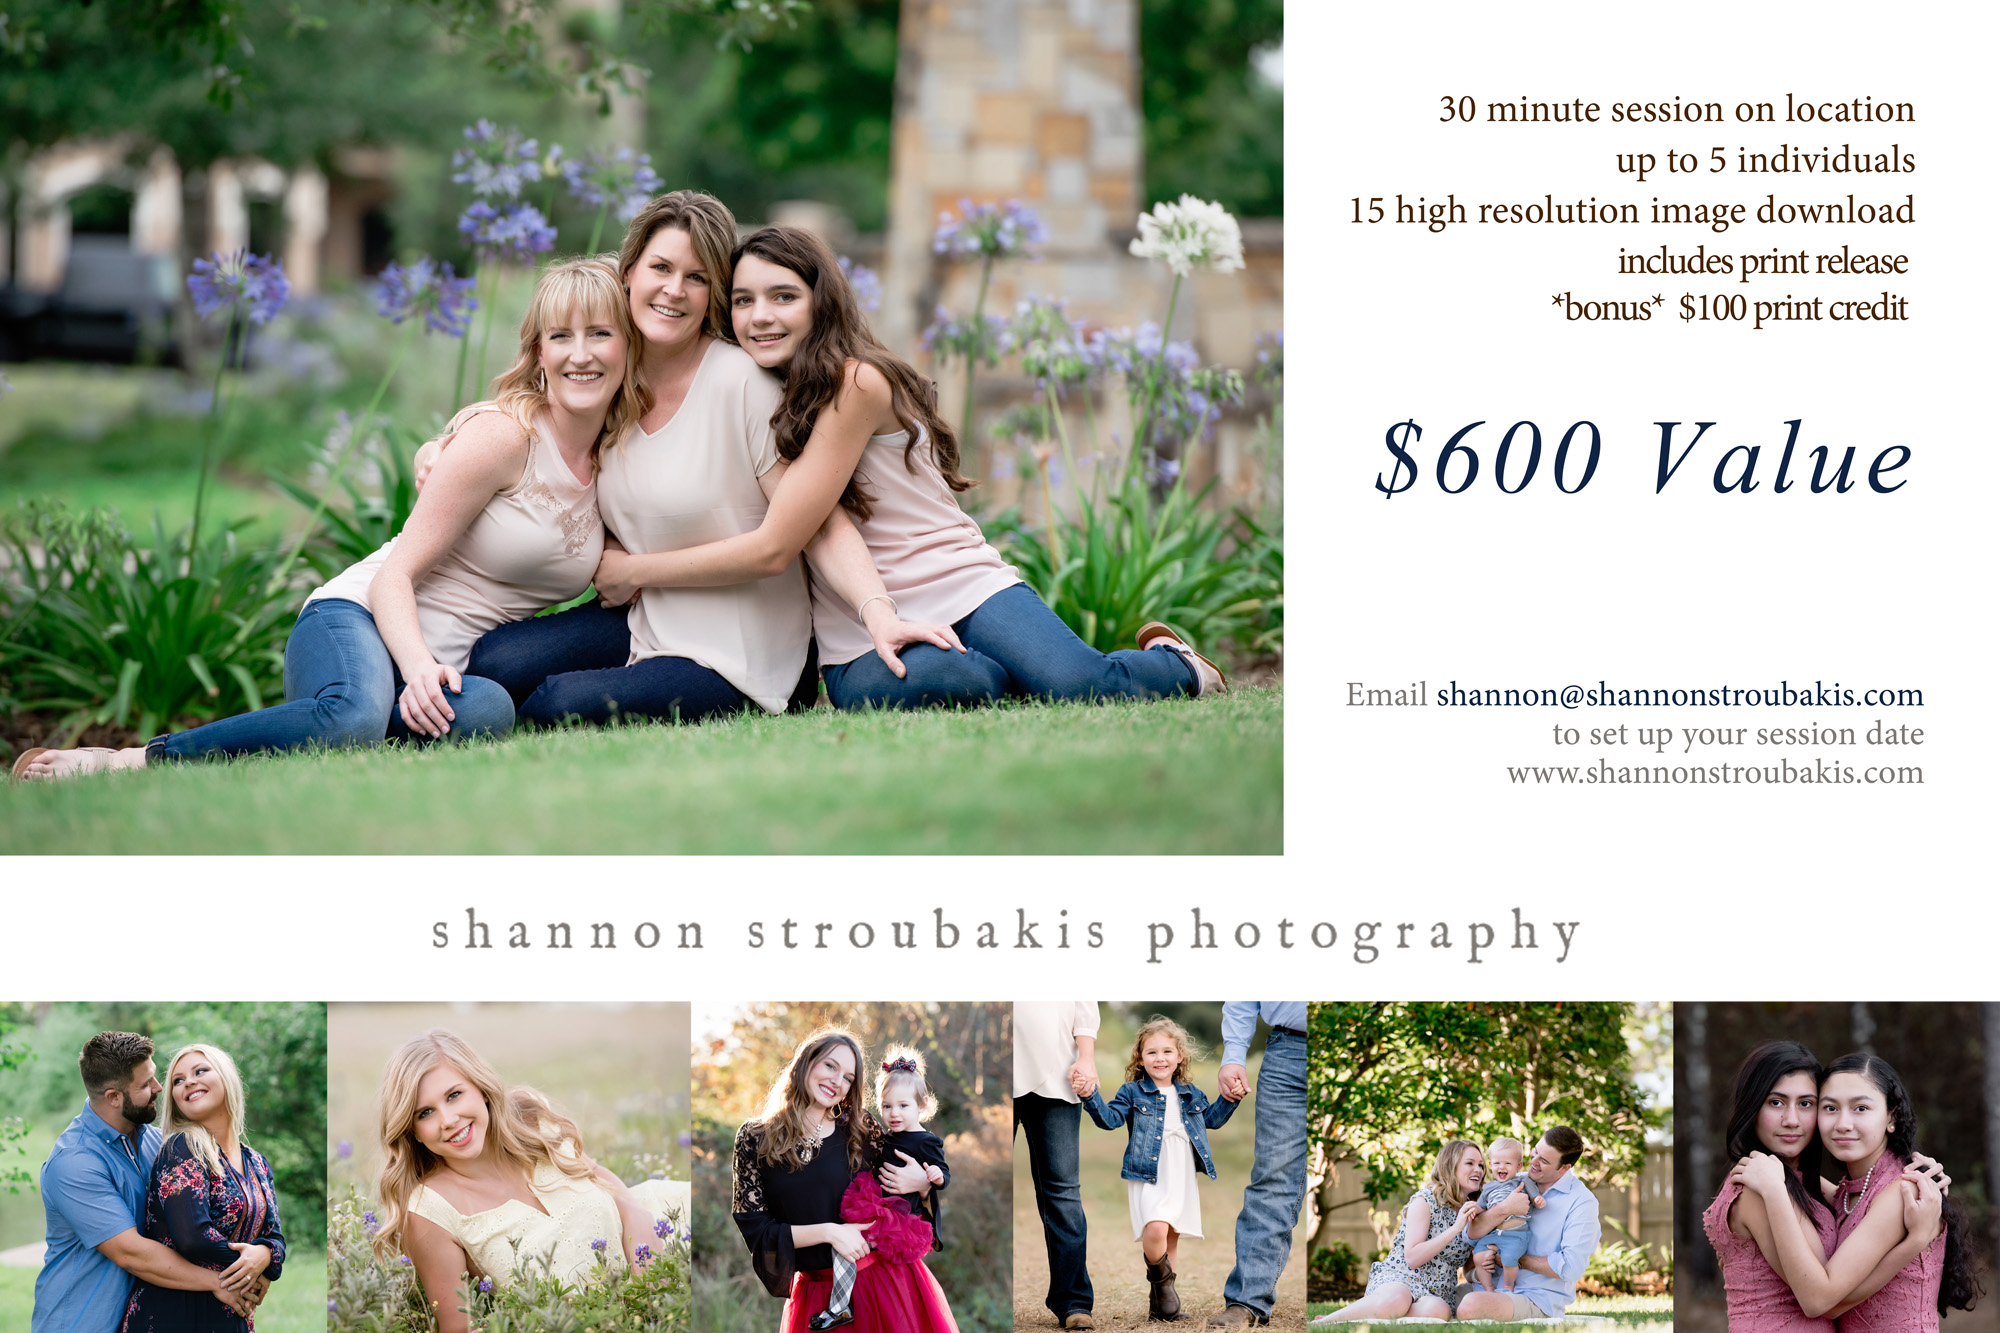 touched by an angel auction shannon stroubakis photography offer